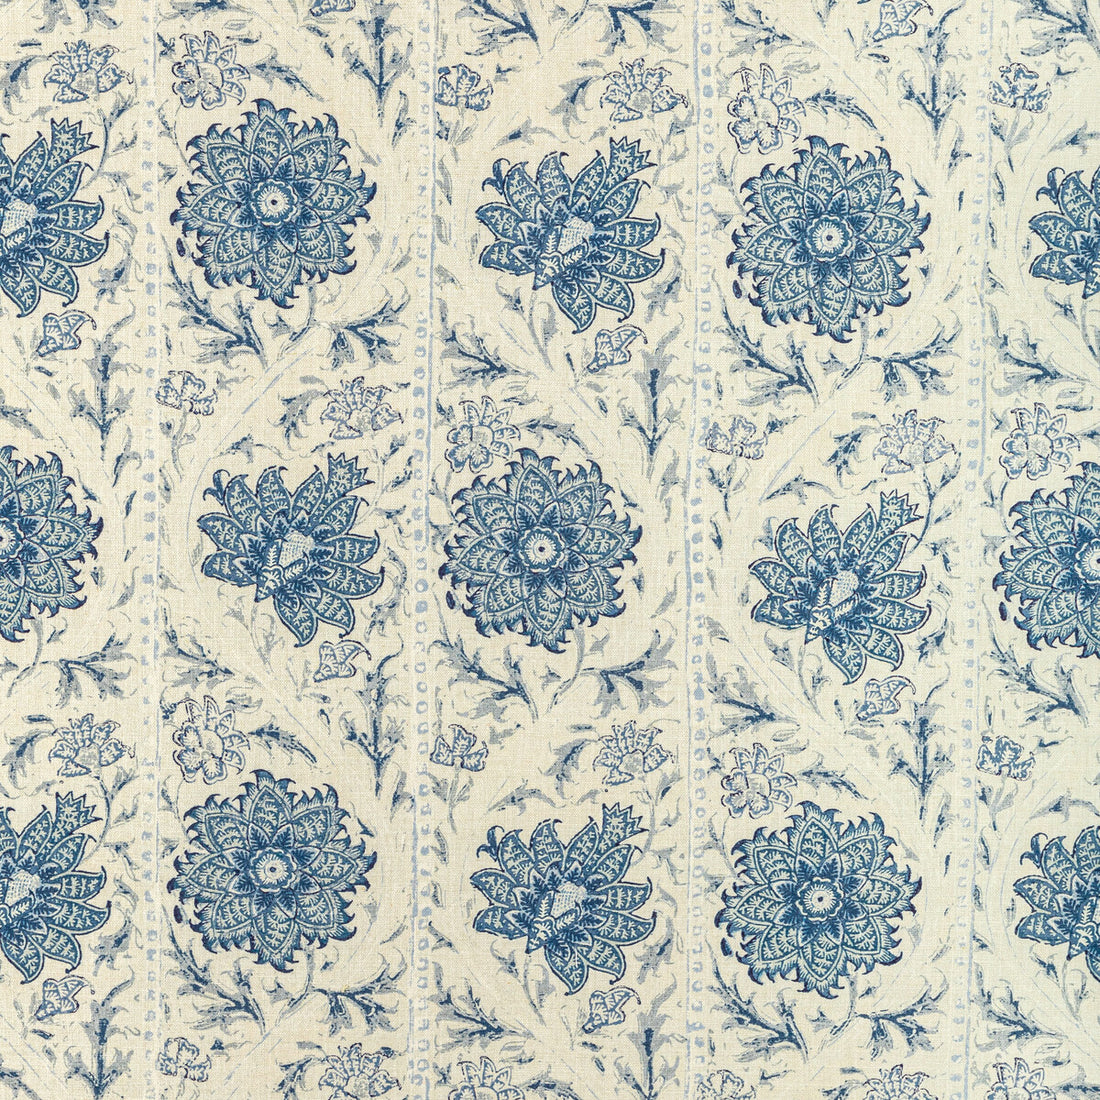 Calico Vine fabric in porcelain color - pattern 2022102.5.0 - by Lee Jofa in the Sarah Bartholomew collection